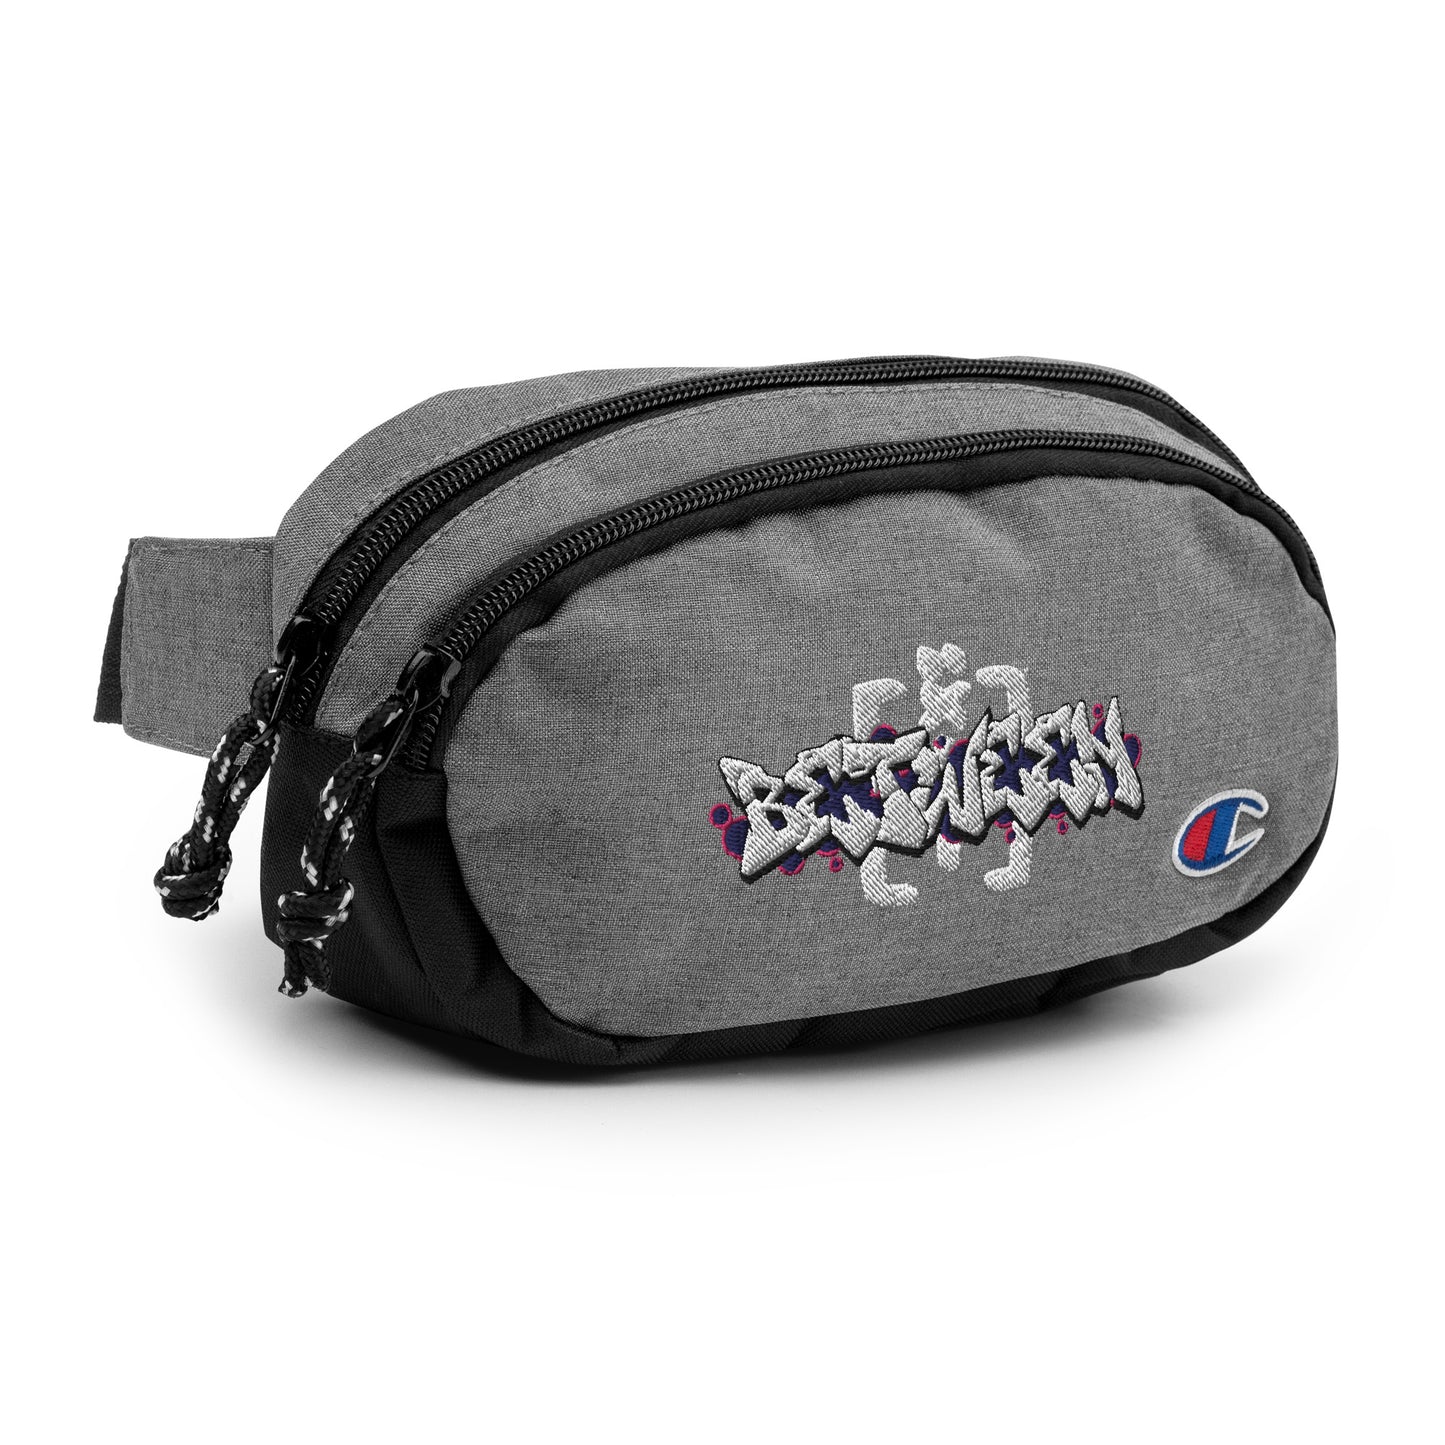 [Graffiti is Good] [Between the Lines] x Champion Fanny Pack